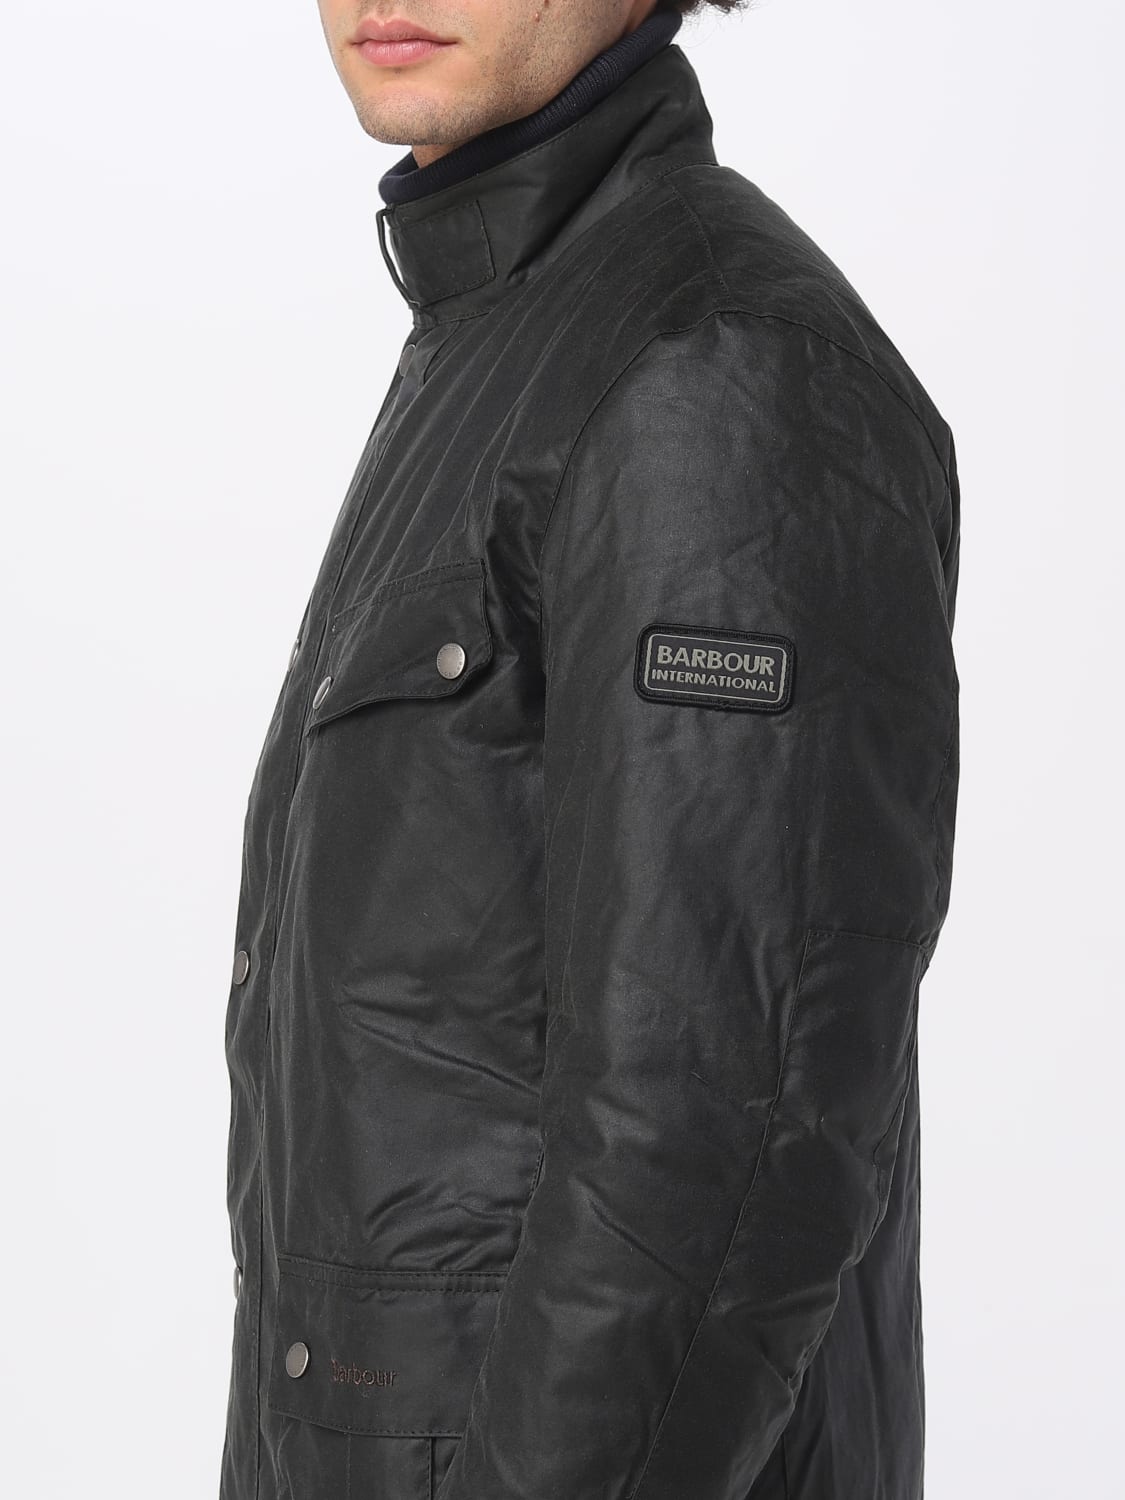 BARBOUR: jacket for man - Military | Barbour jacket MWX0337MWX online ...